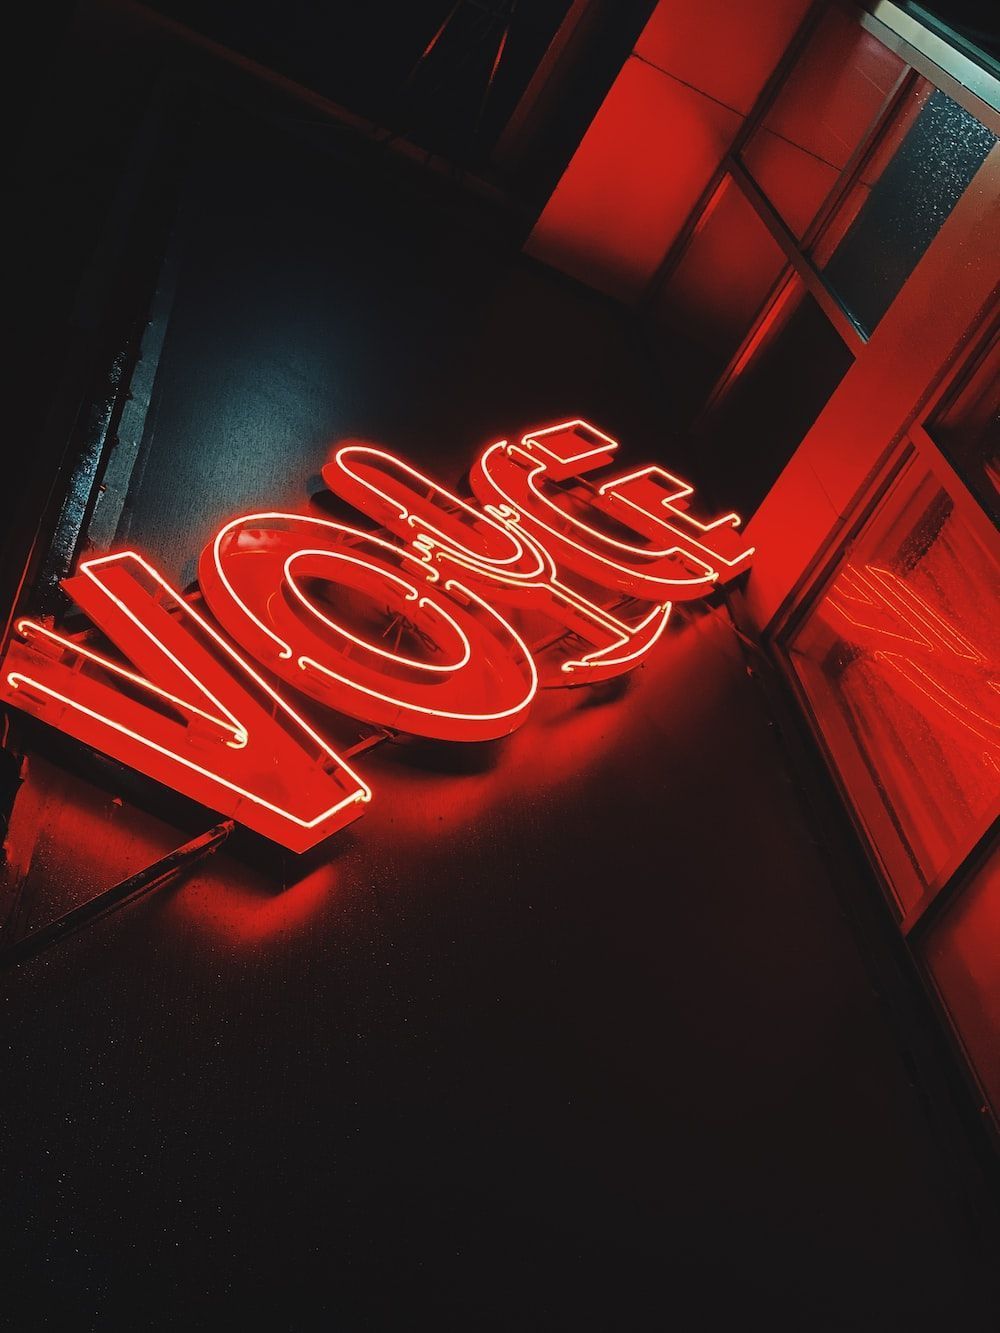 Red and white open neon signage photo. - Neon red